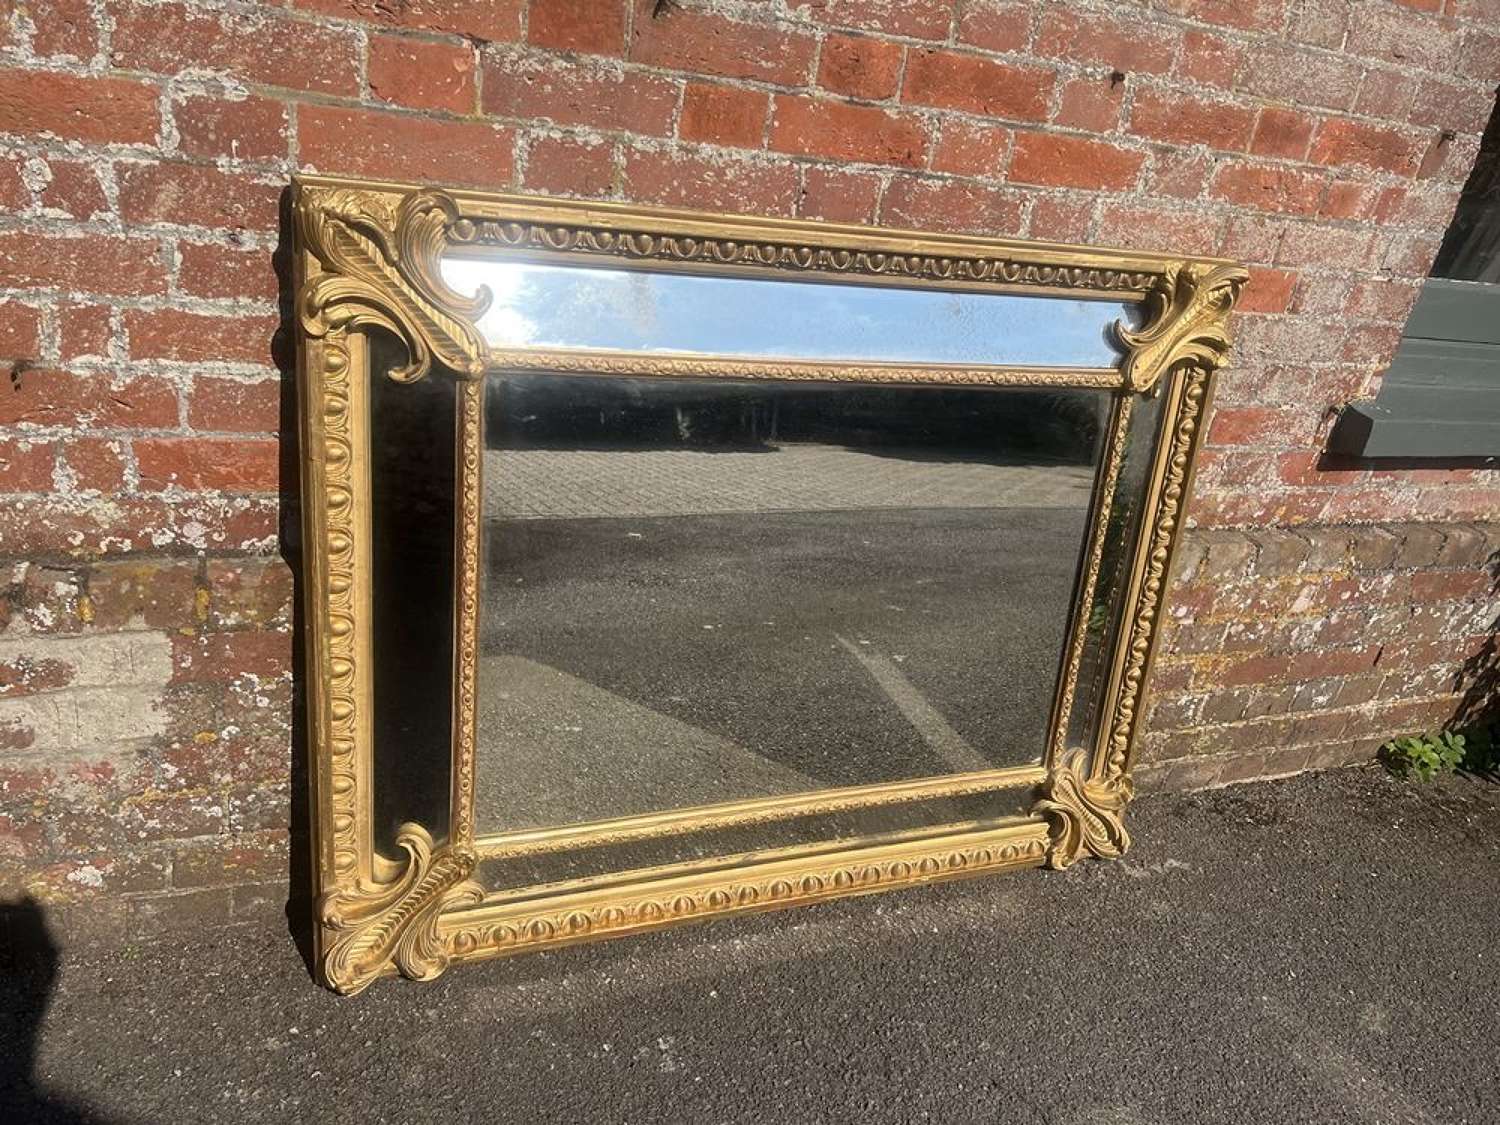 A Stunning large Antique French 19th C Gilt Cushion Mirror.